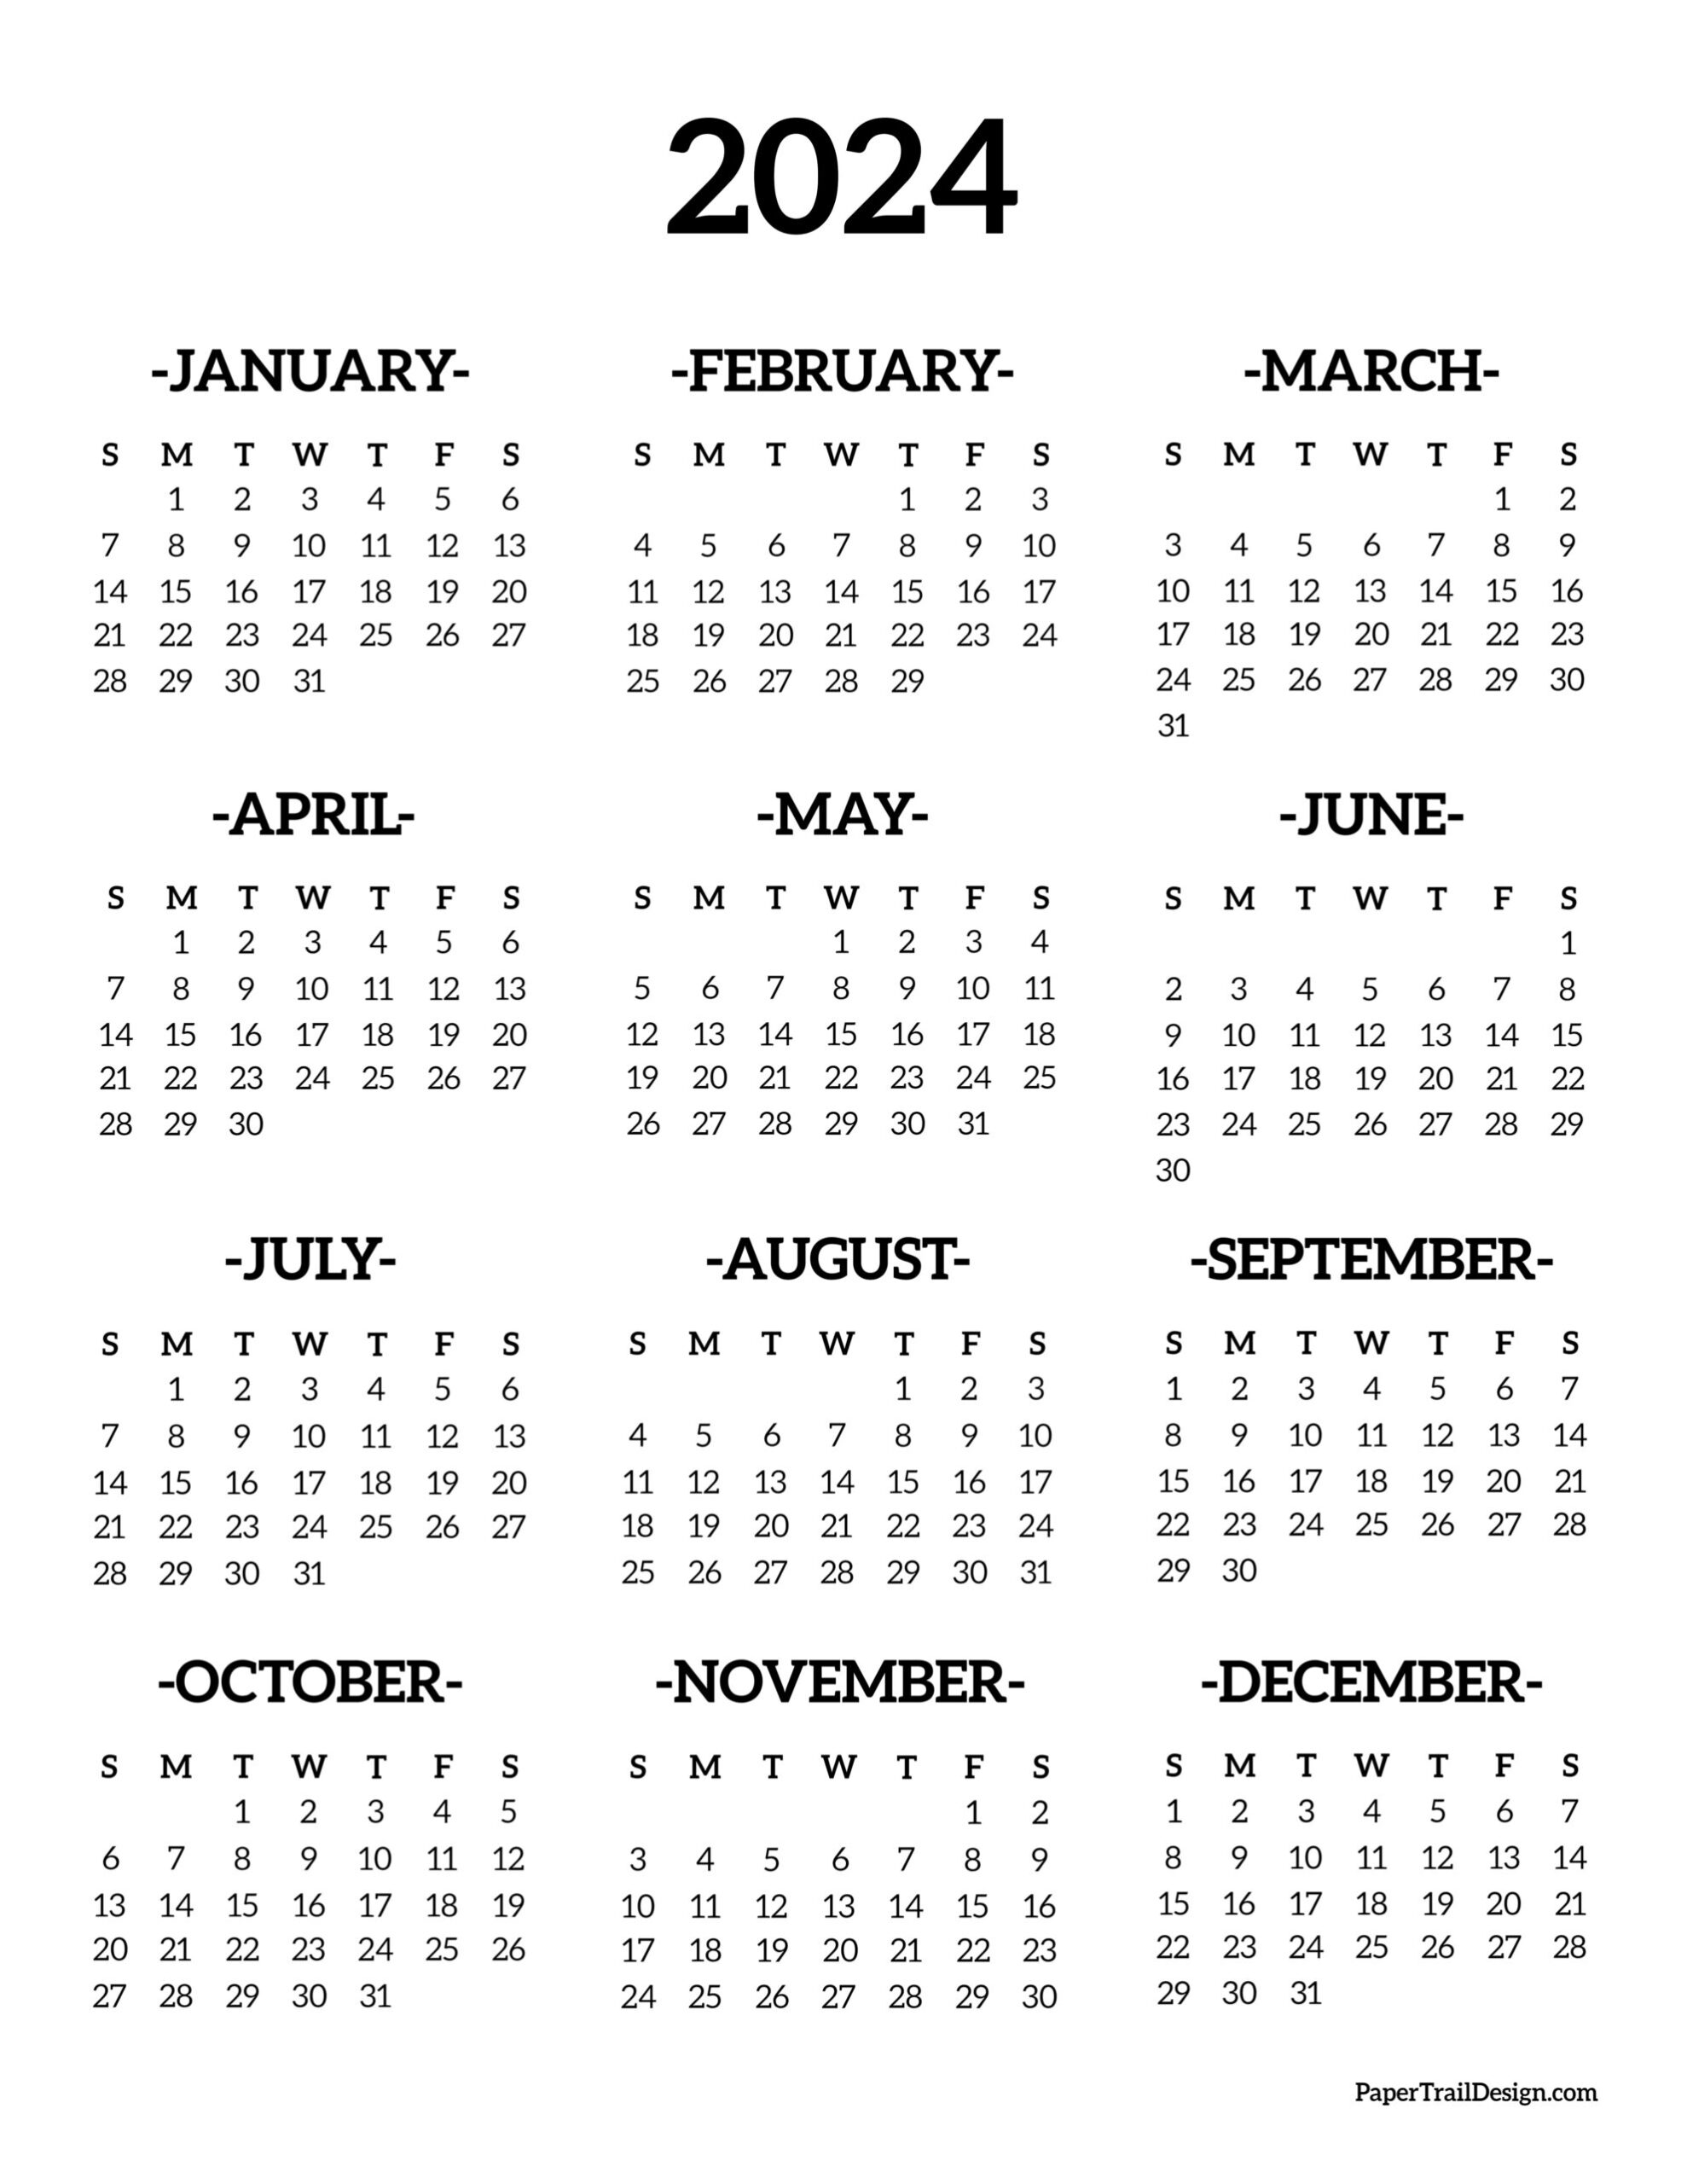 Calendar 2024 Printable One Page - Paper Trail Design for 2024 Annual Calendar Printable Free